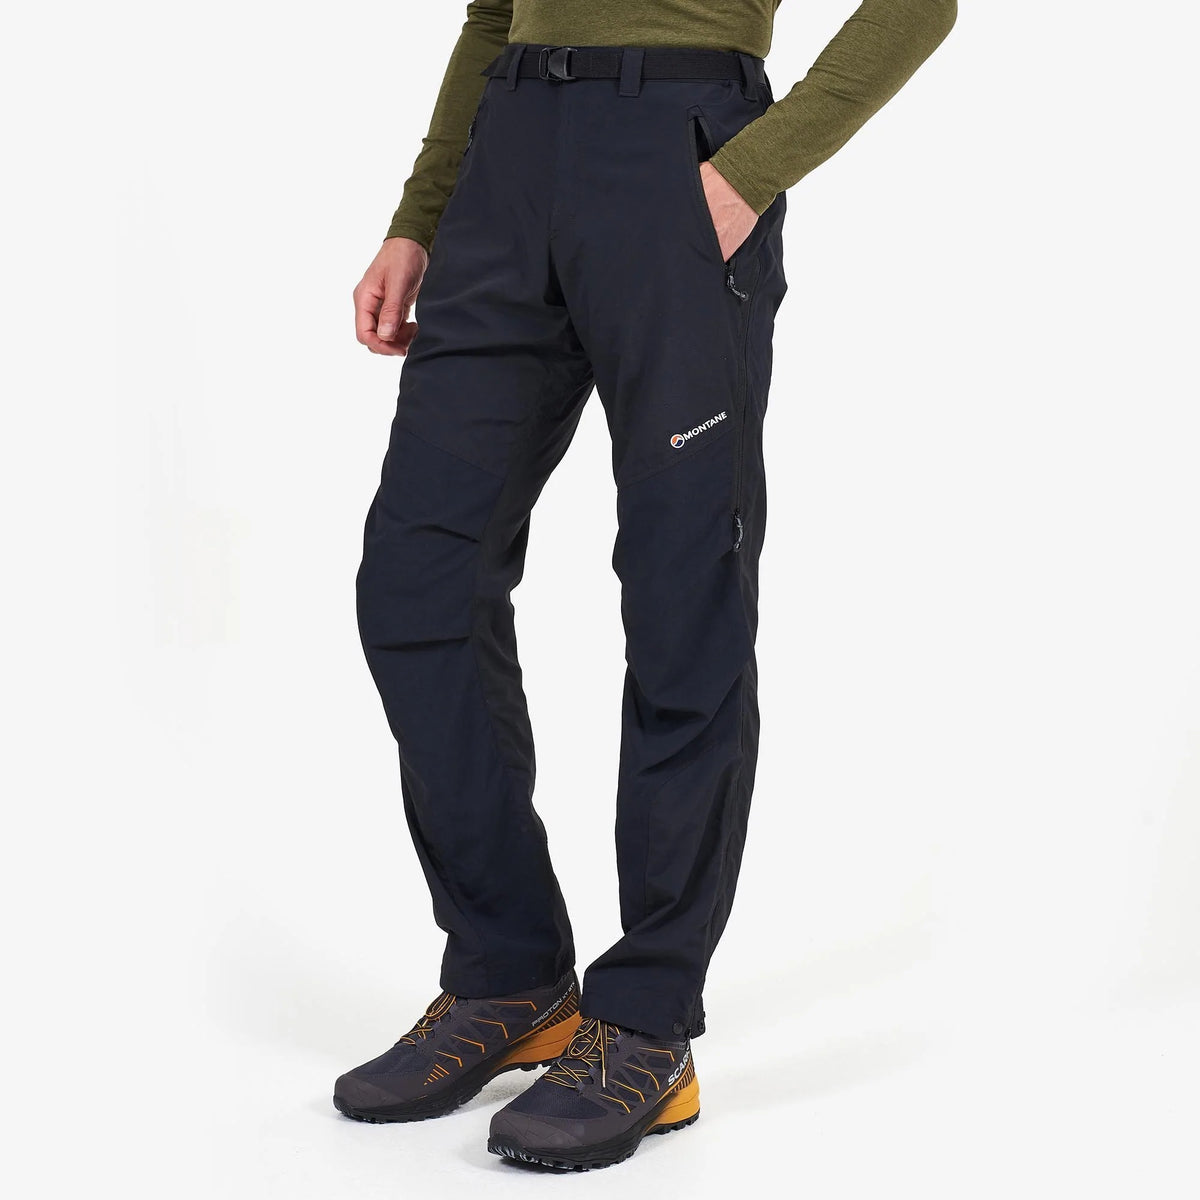 Terra Pants Reg Leg OLD - 毅成戶外用品RC Outfitters